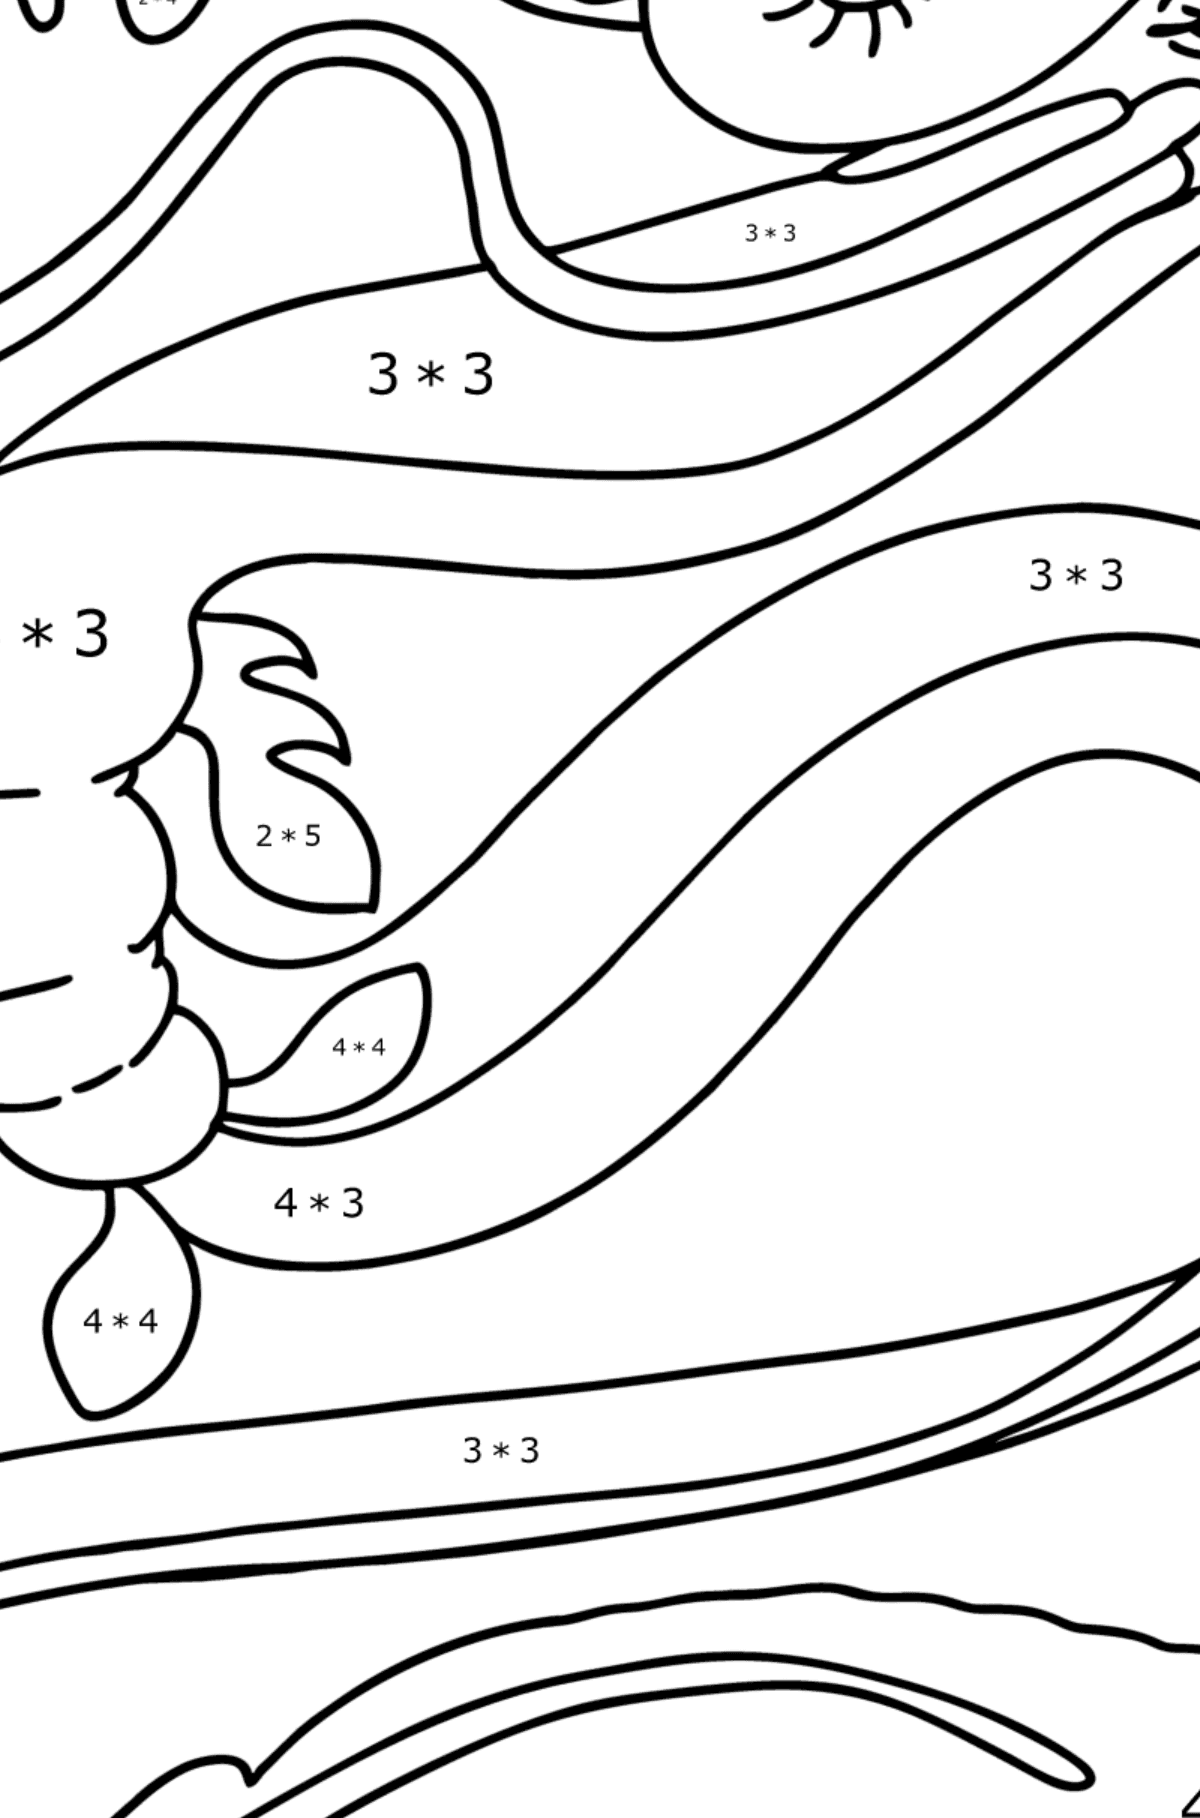 Snake Dragon coloring page - Math Coloring - Multiplication for Kids